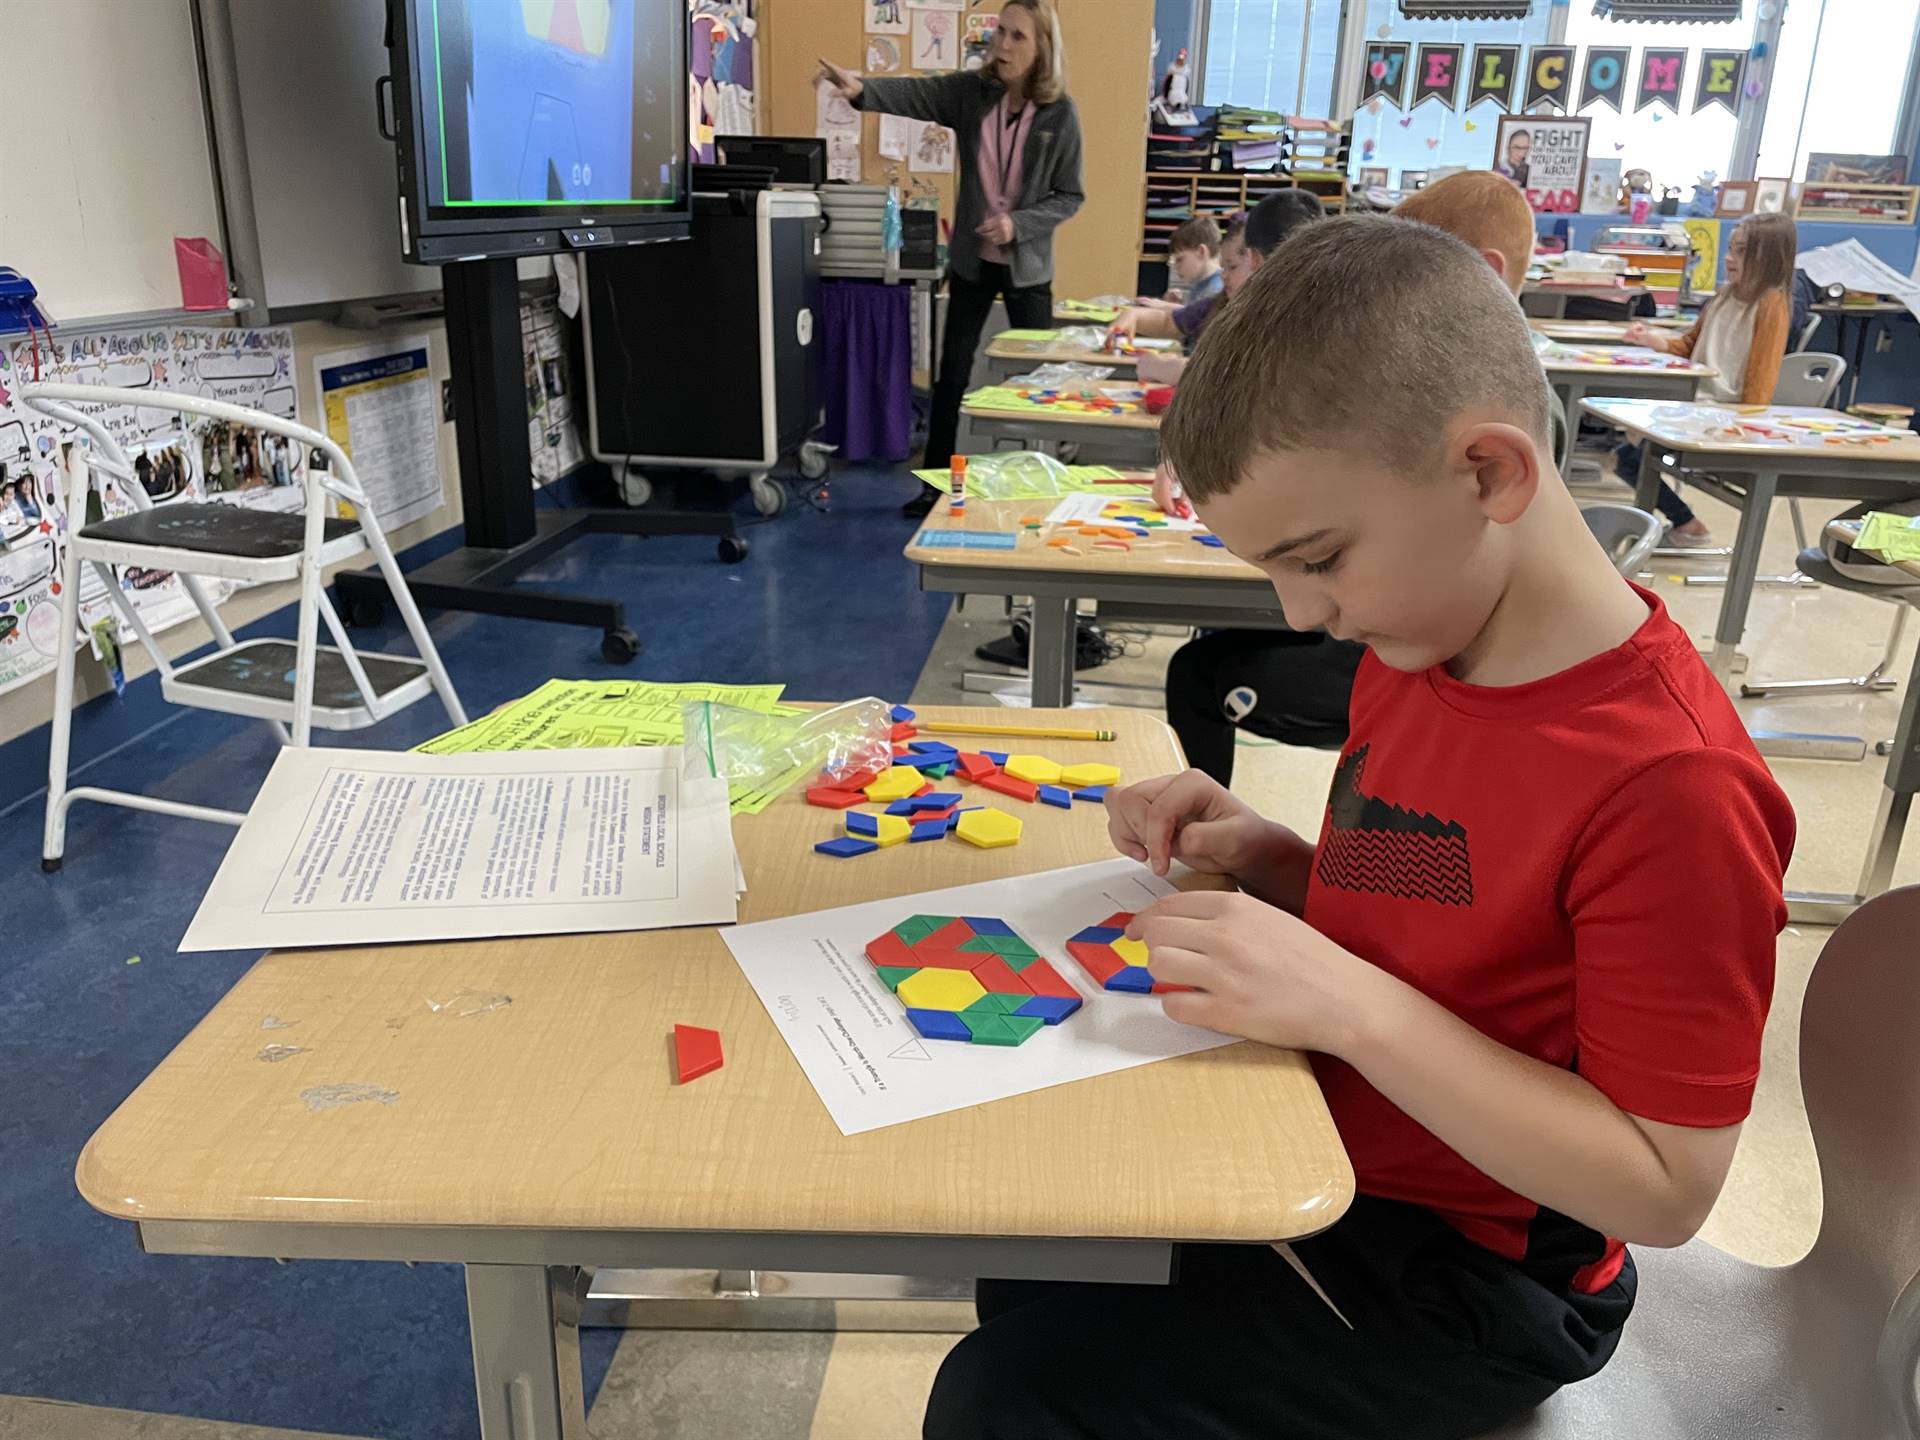 Students use blocks to create 2D shapes